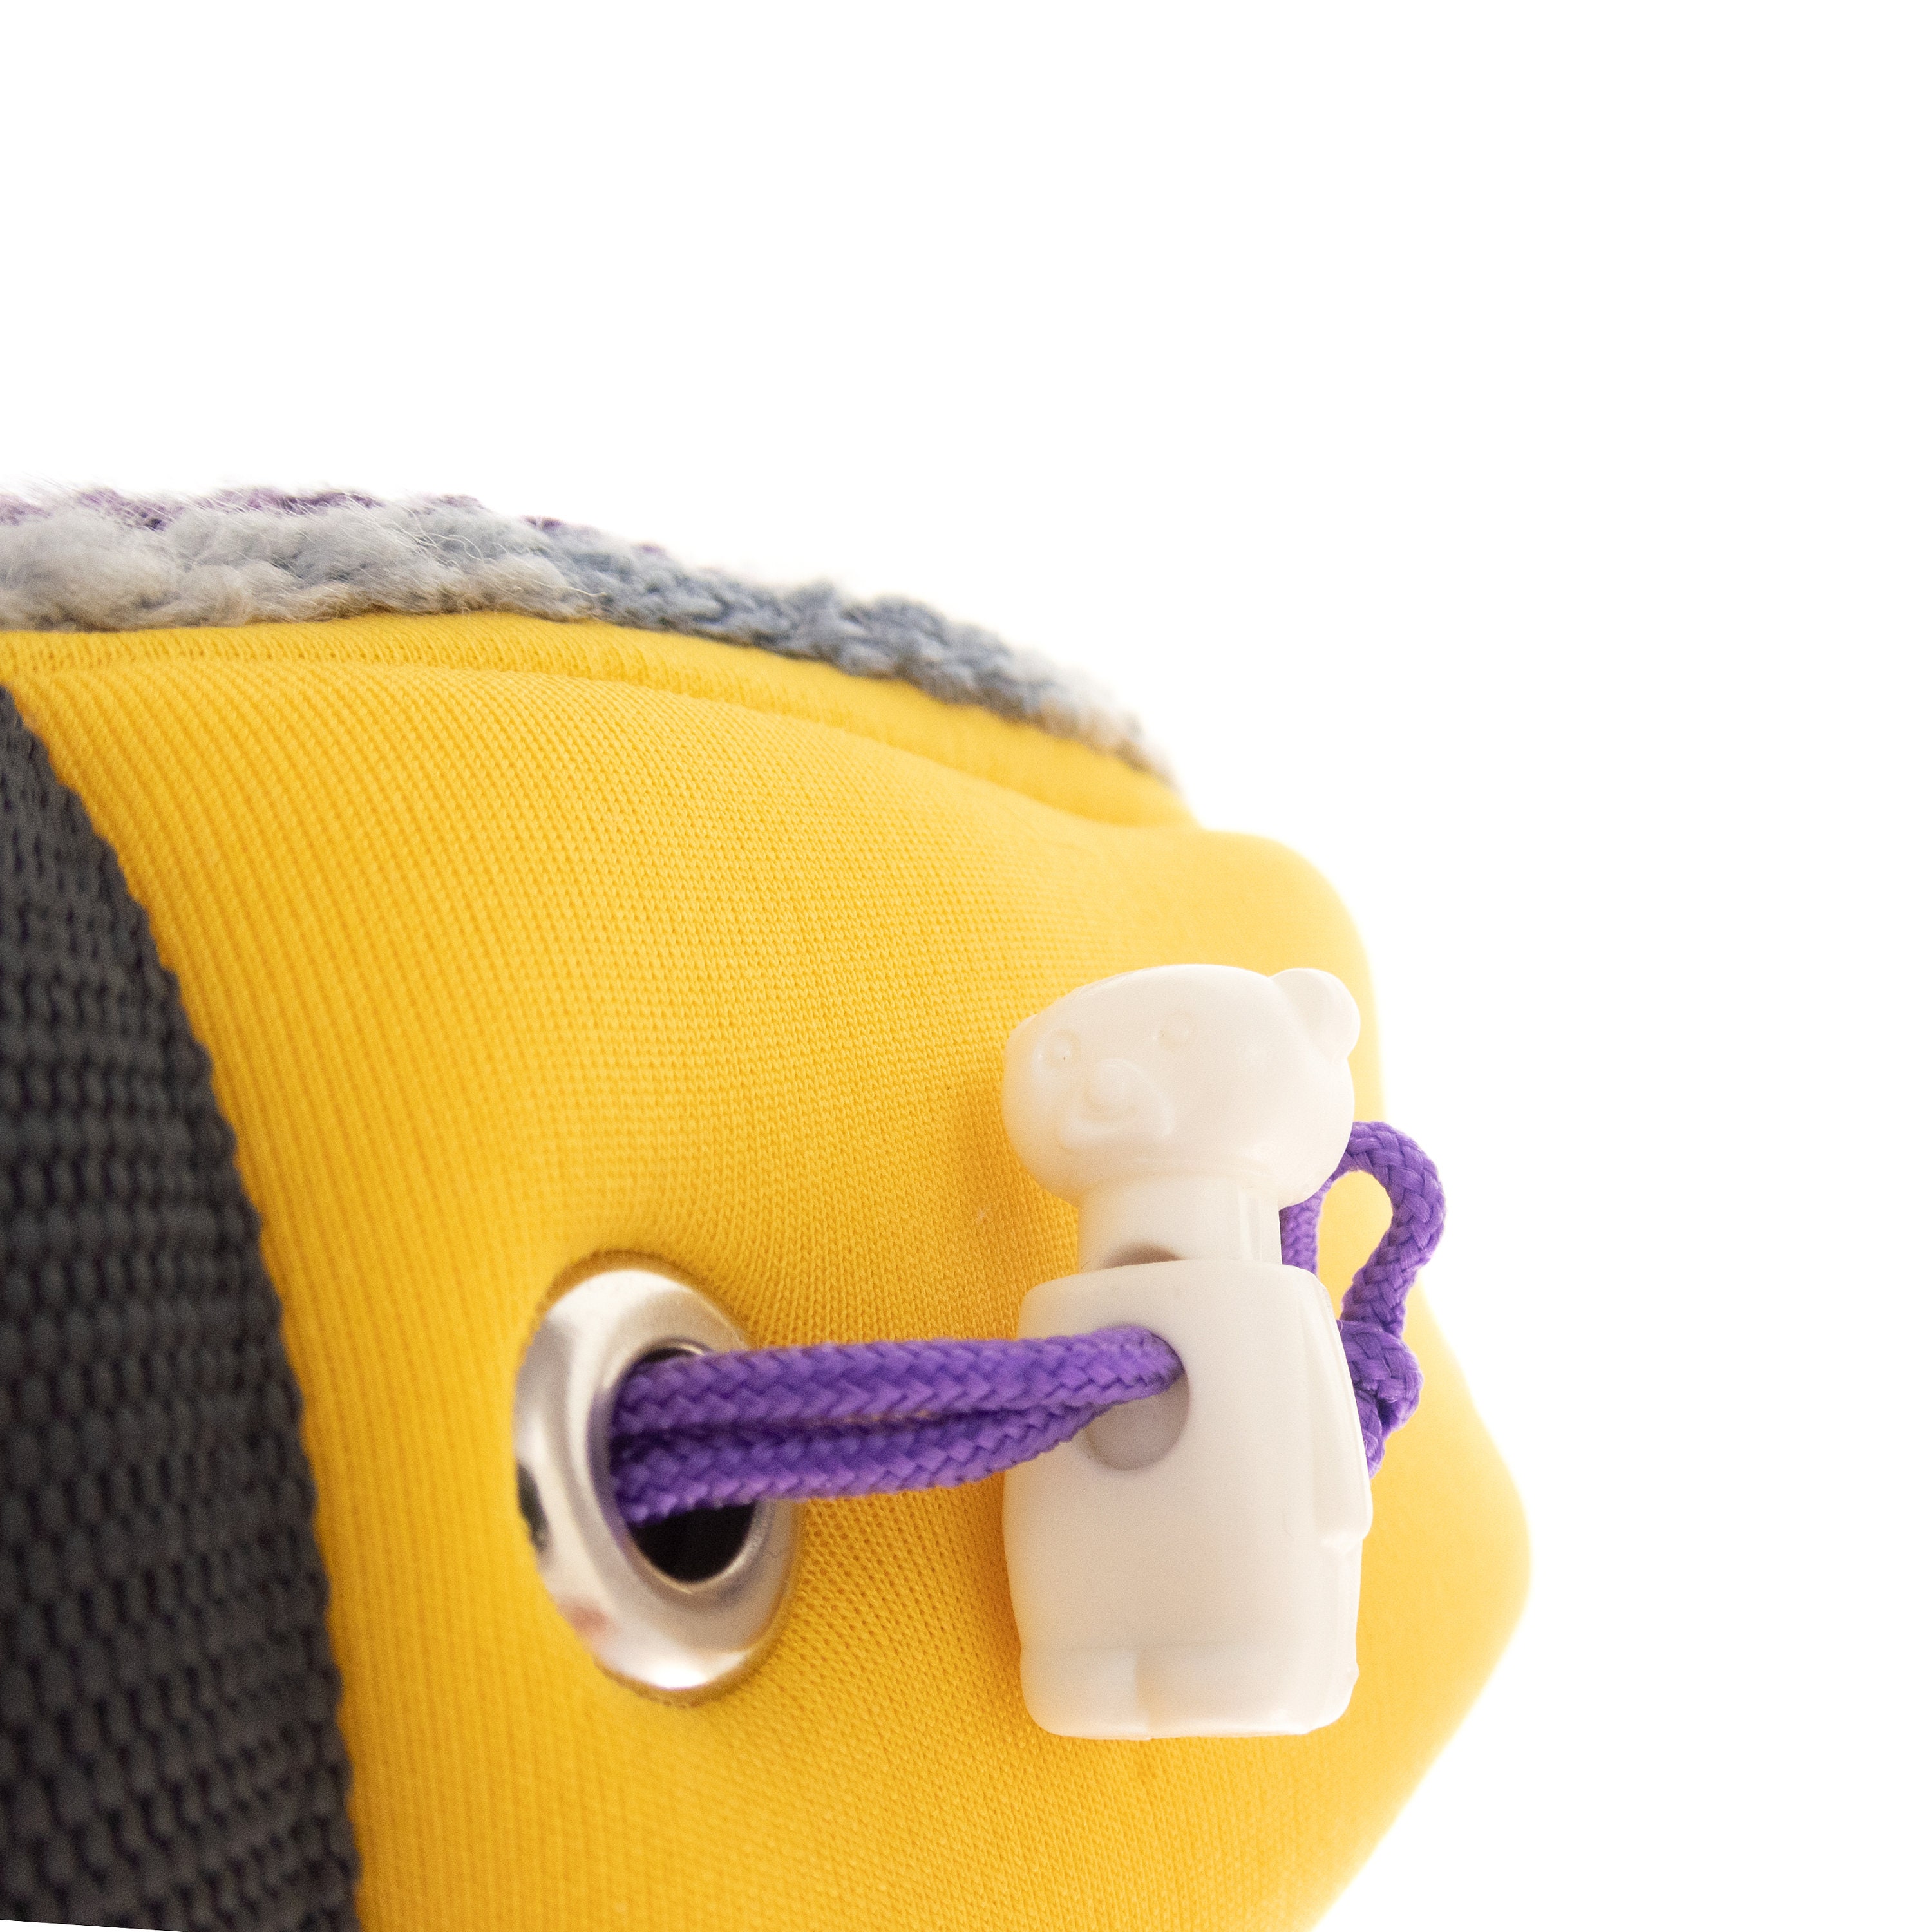 Mini Chalk Bag for Bouldering or Rock Climbing, Yellow Chalk Pouch for  Harness or Belt. Handmade in Europe of Neoprene, Yarn, Knit. S Size